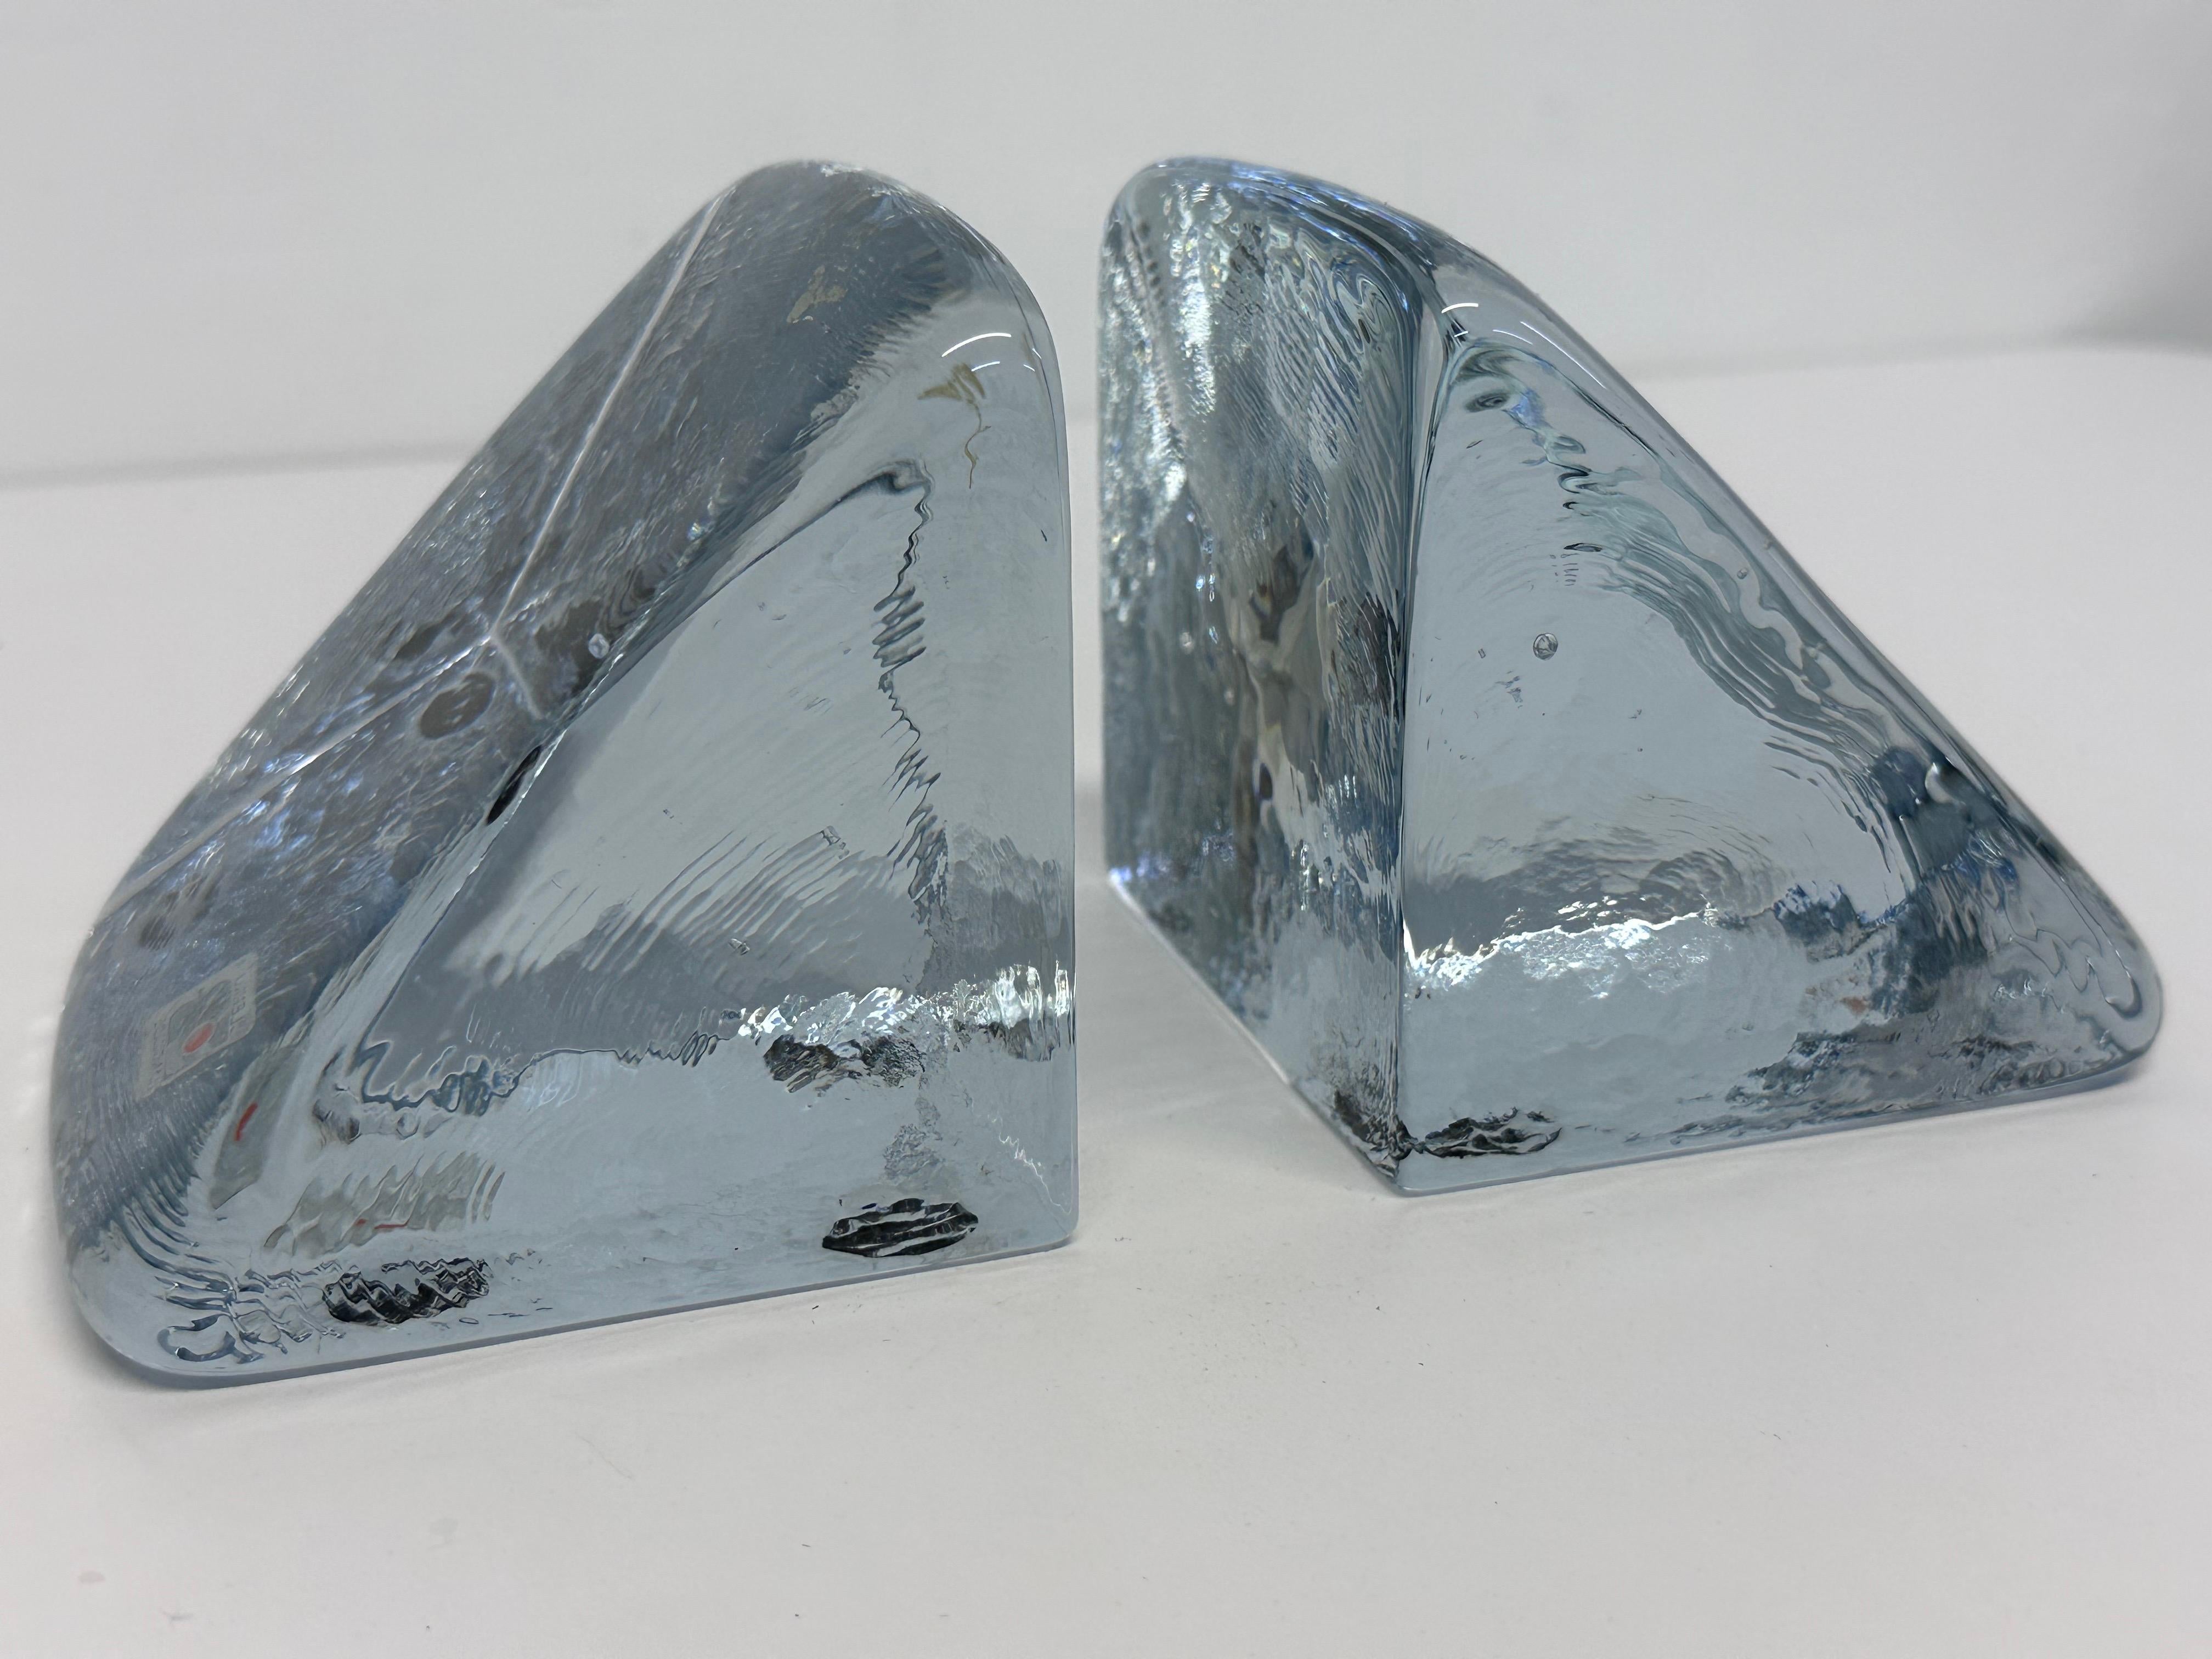 Pair of handmade glass bookends with smooth top and textured sides by Blenko Glass, USA circa 1980s.

Measurement for each block: w3.5